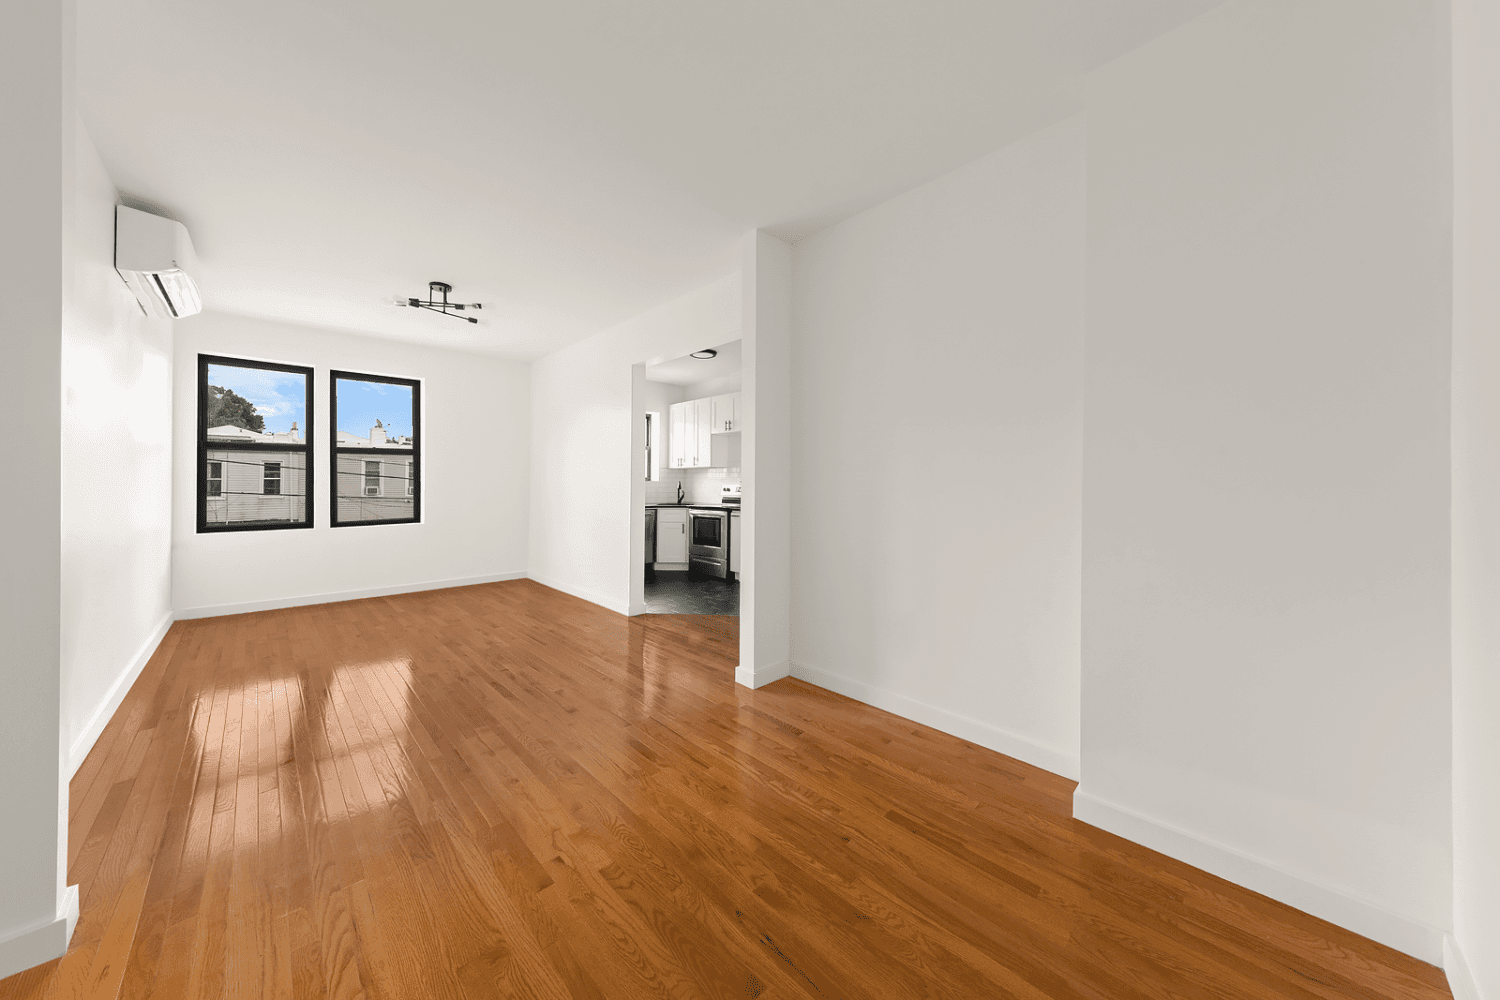 Welcome to this beautifully gut renovated 2 bedroom in Bushwick !